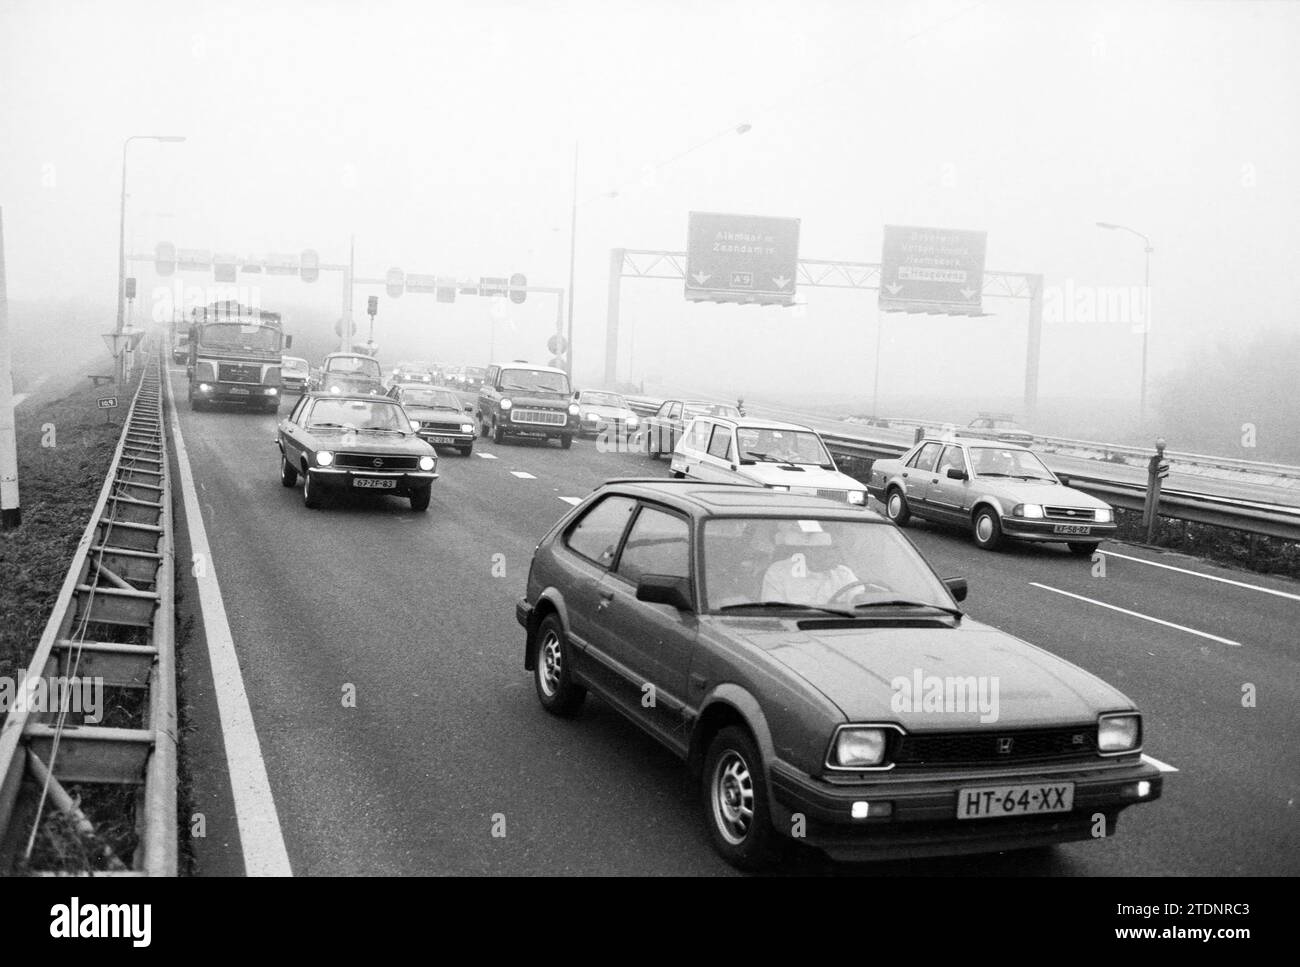 Action of officials at Velsertunnel, Demonstration, 07-11-1983, Whizgle News from the Past, Tailored for the Future. Explore historical narratives, Dutch The Netherlands agency image with a modern perspective, bridging the gap between yesterday's events and tomorrow's insights. A timeless journey shaping the stories that shape our future Stock Photo